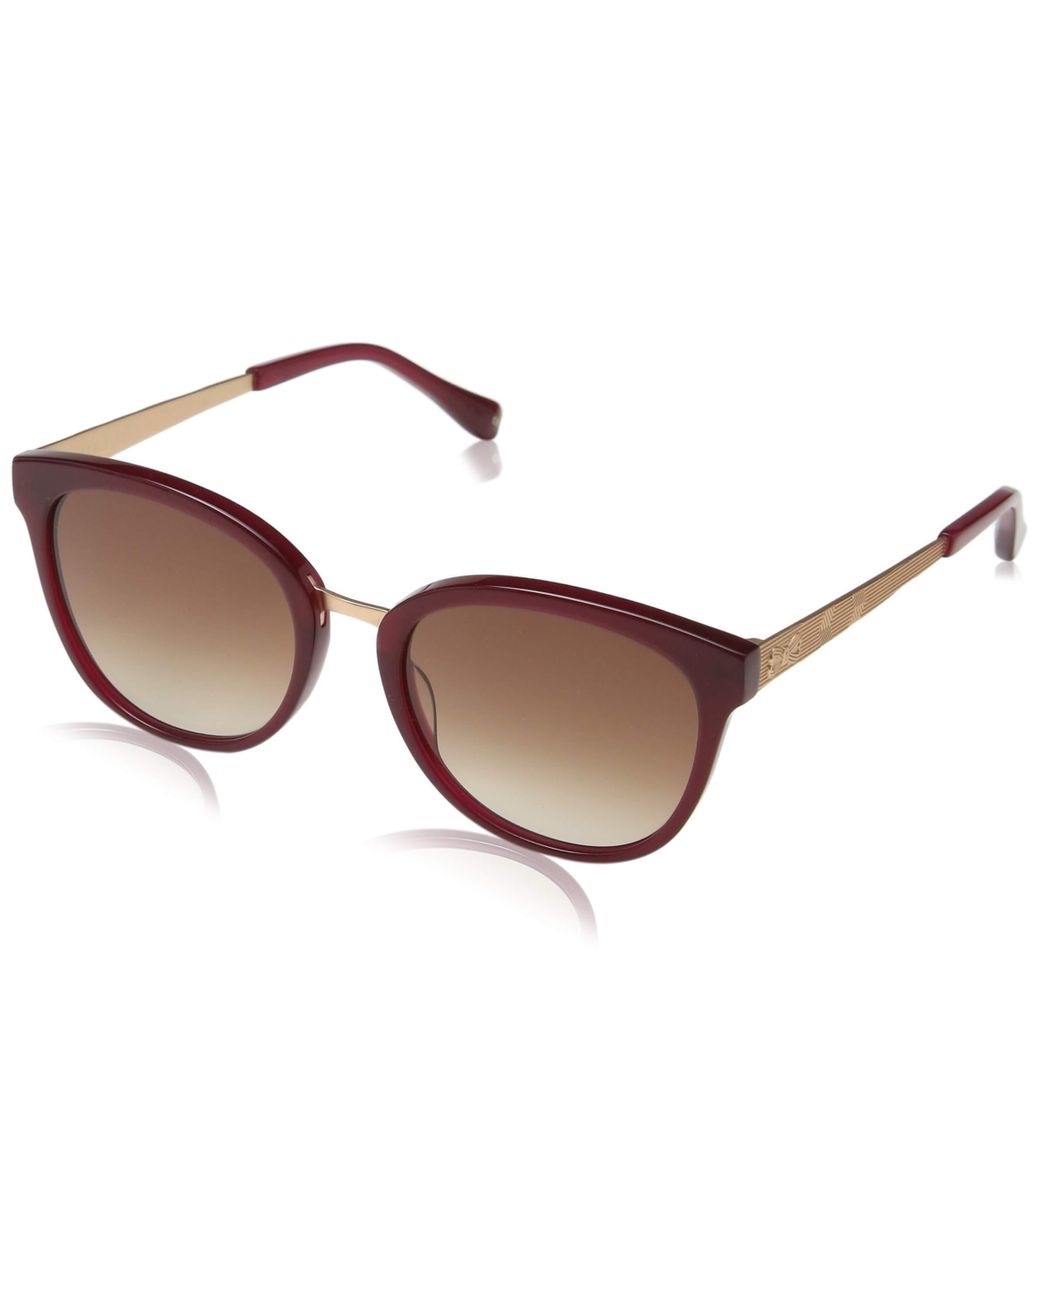 Ted Baker Avery Sunglasses in Burgundy/Brown (Brown) - Lyst